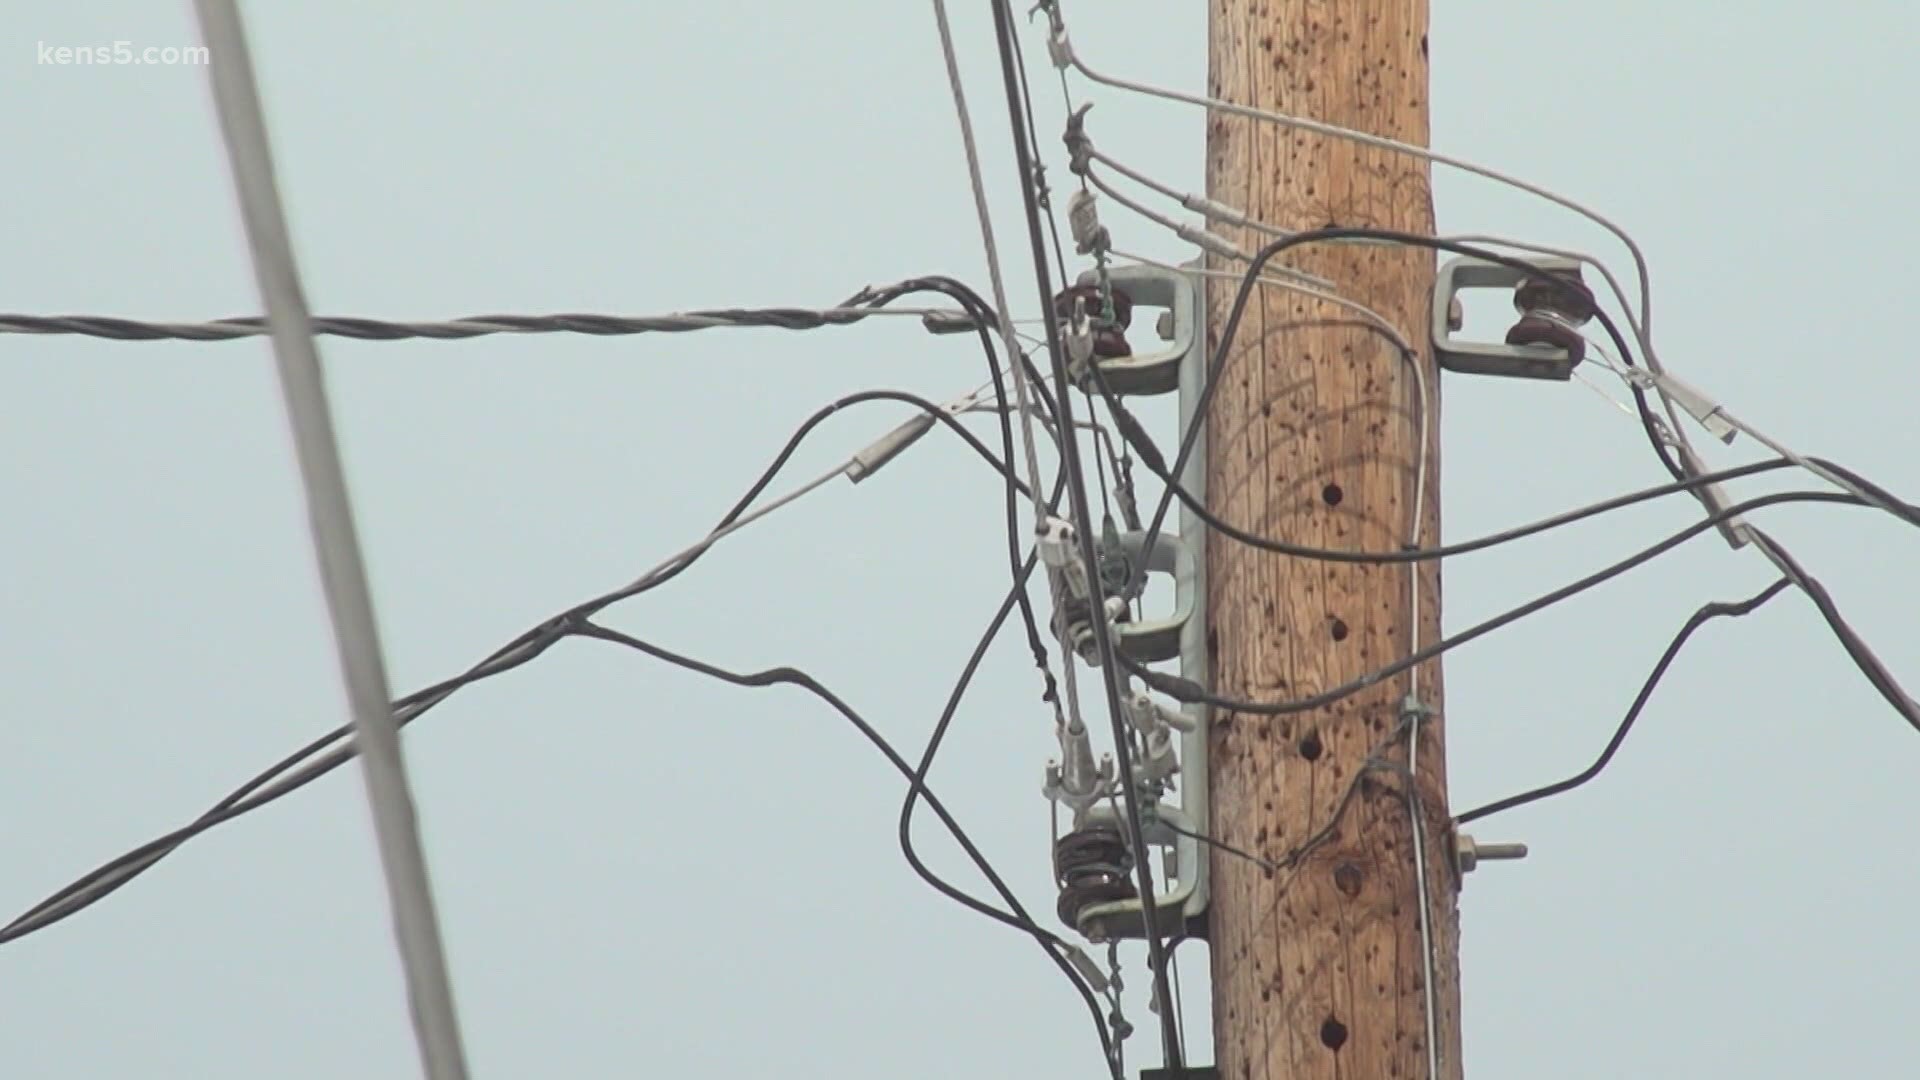 Earlier Wednesday, ERCOT asked consumers and businesses to reduce electricity use through tonight in order to avoid what they called "emergency conditions."